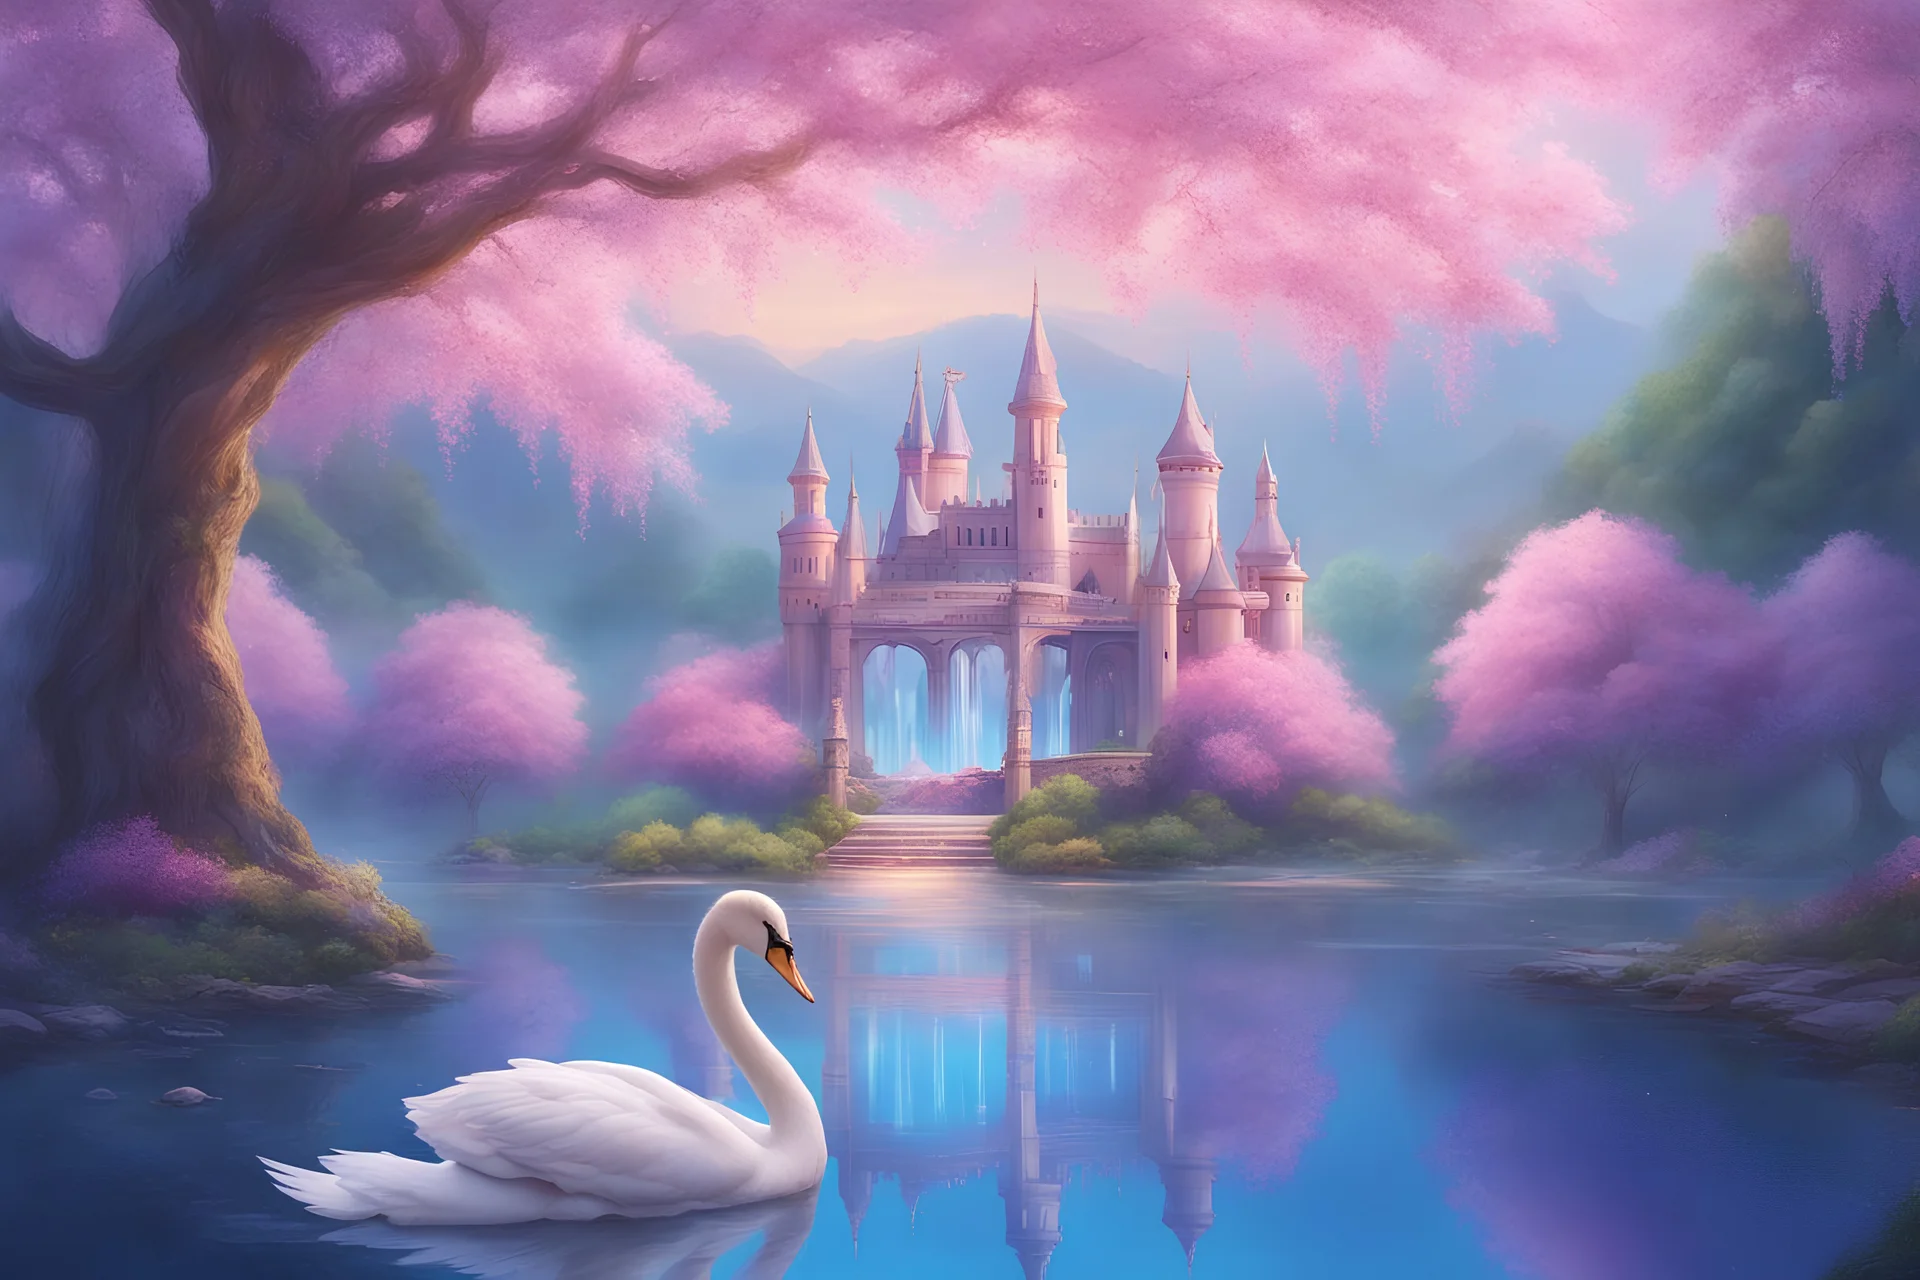 a pink tree in the style of A Silent Voice with futuristic crystal castle in the countryside, starship, green plants, flowers, wisteria, big trees blue sky, pink, blue, yellow soft lights, waterfall with beautiful fairies with long hair and transparent wings, couple of swans swimming in the lake